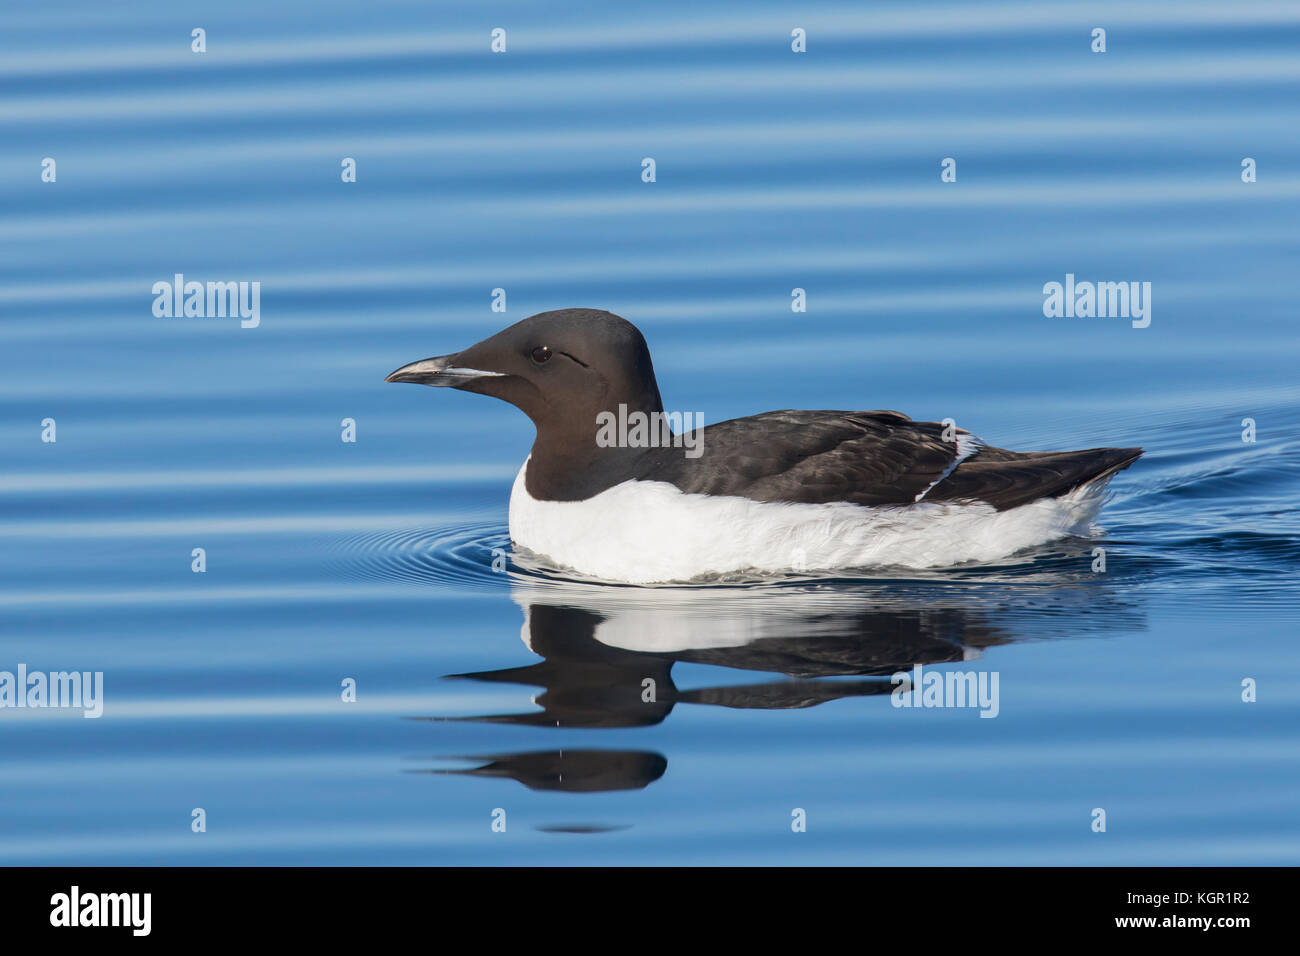 Thick-billed murre / Brünnich's guillemot (Uria lomvia) swimming in sea, native to the sub-polar regions of the Northern Hemisphere, Svalbard, Norway Stock Photo